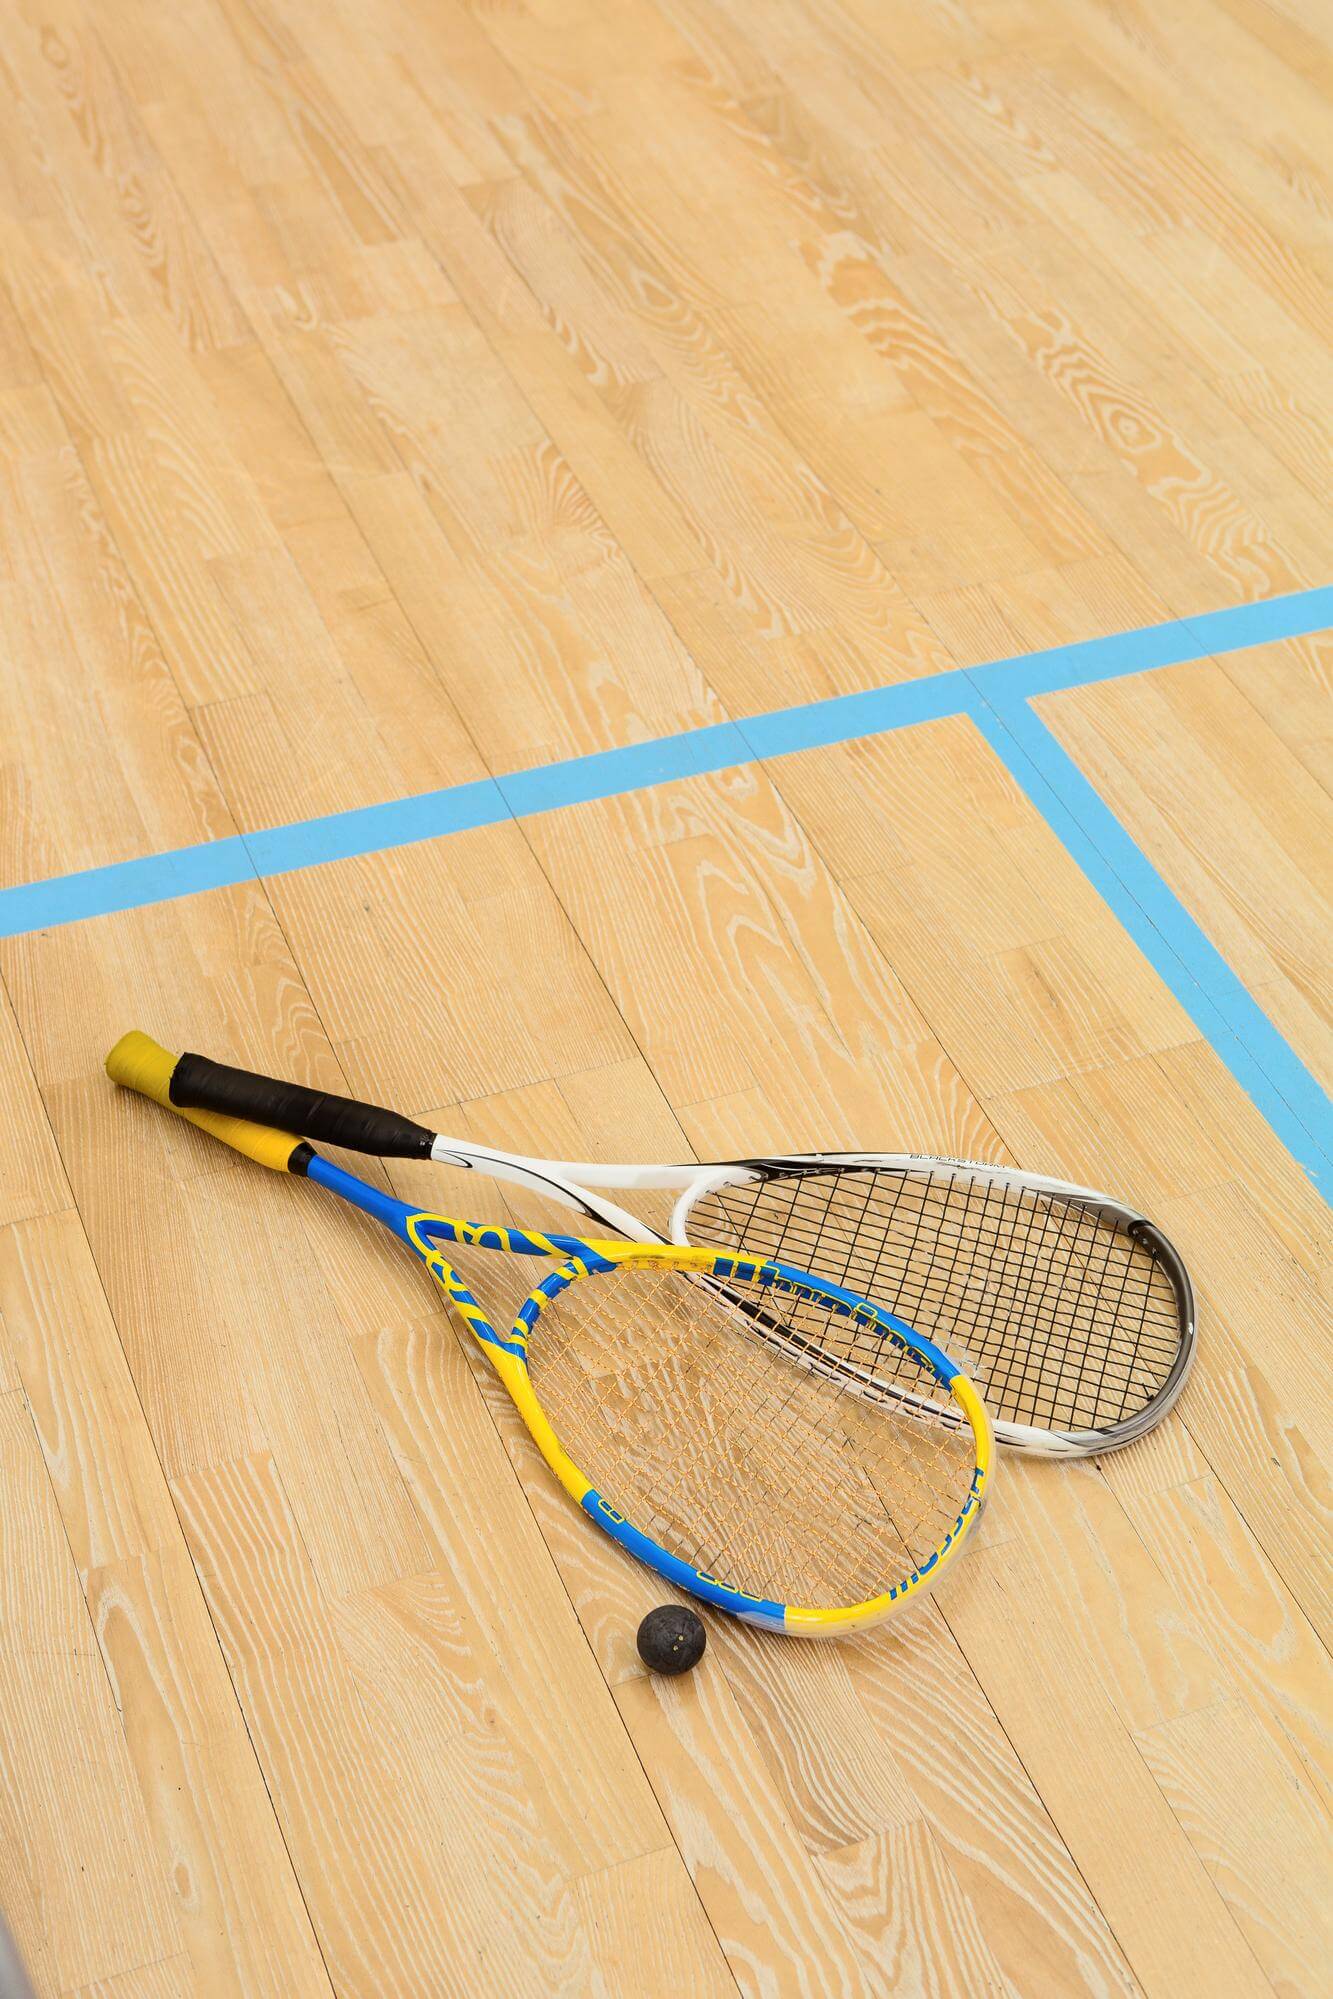 The Equipment Used in Squash